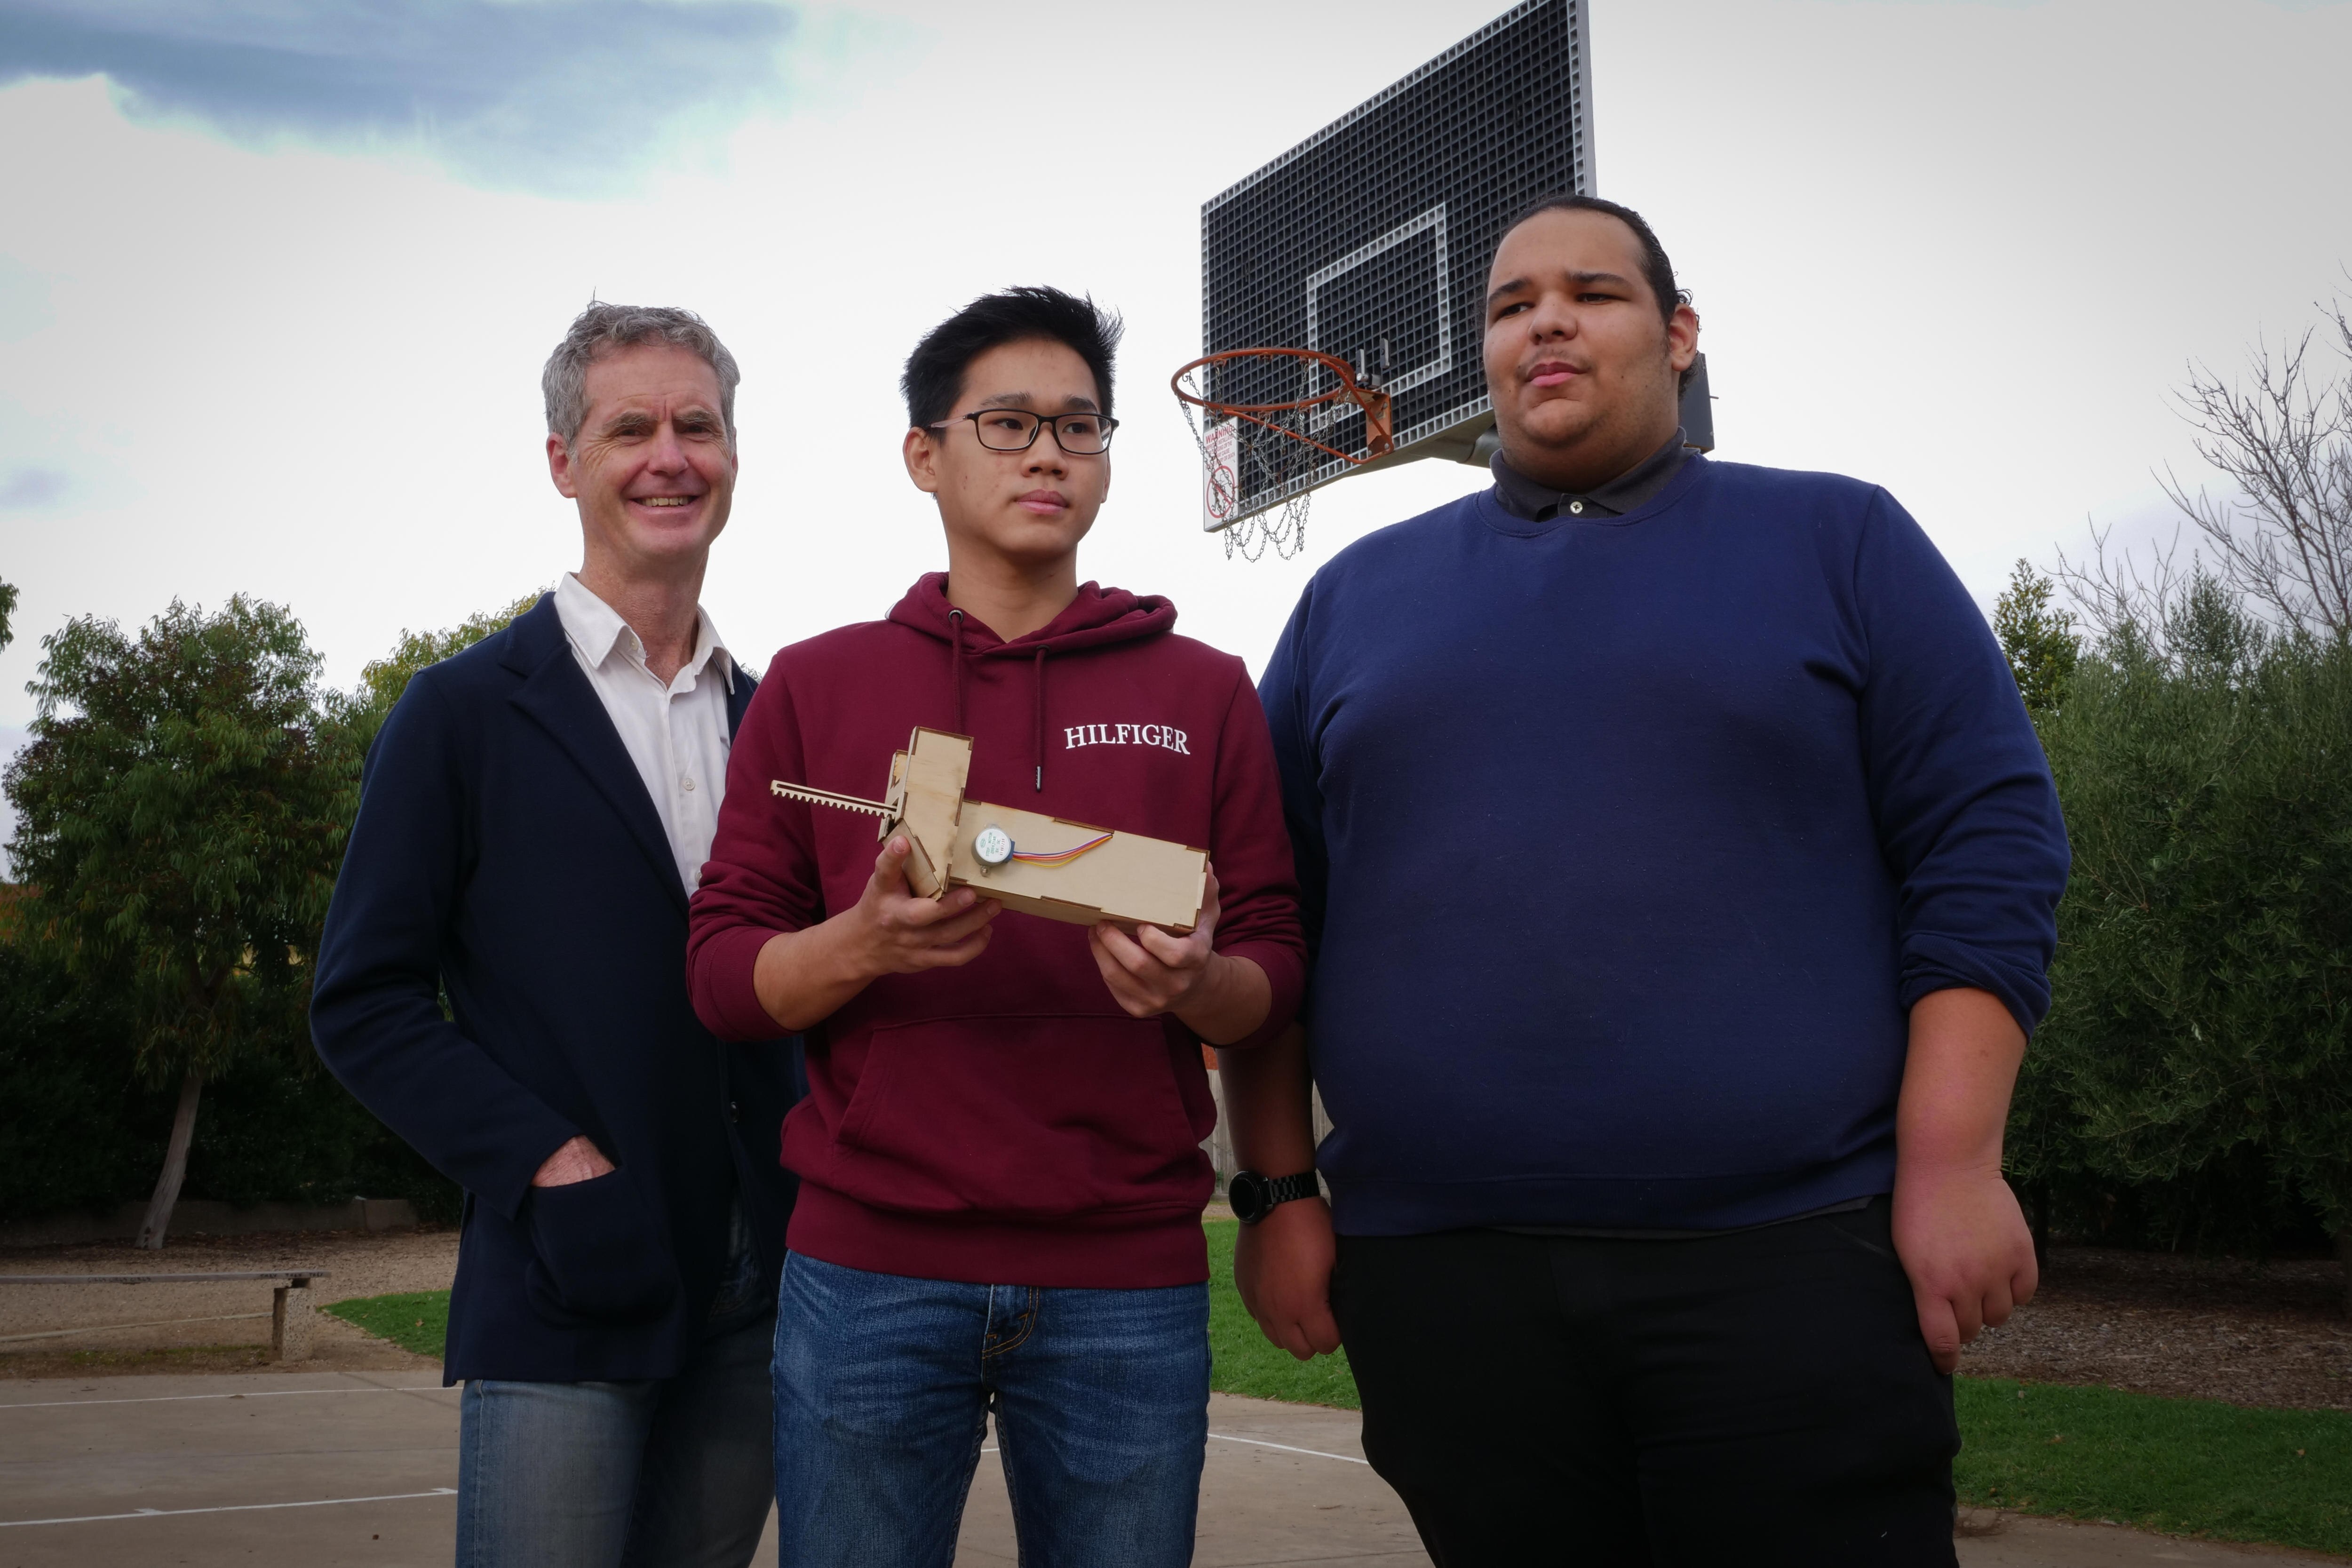 abc.net.au - Coburg basketball ring gets innovative upgrade after night noise complaints